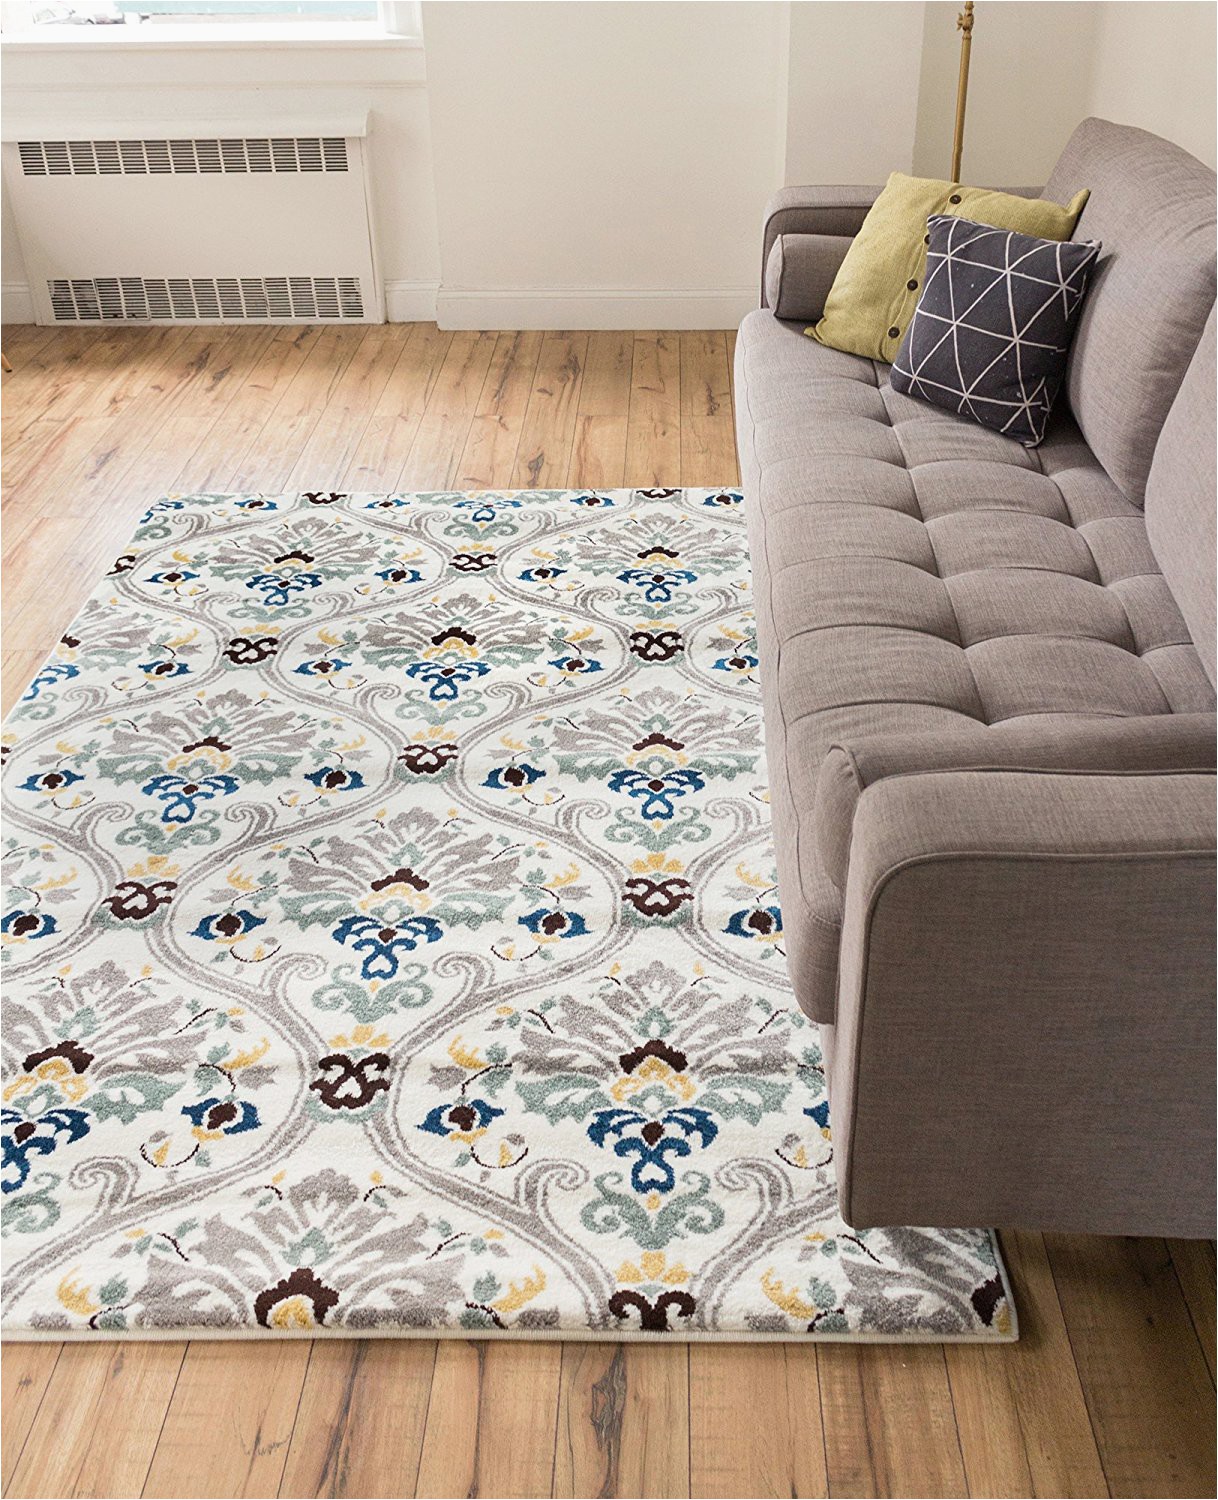 Cat themed area Rugs 5×7 Ogee Waves Lattice Grey Gold Blue Ivory Floral area Rug 5×7 5 3" X 7 3" Modern oriental Geometric soft Pile Contemporary Carpet Thick Plush Stain